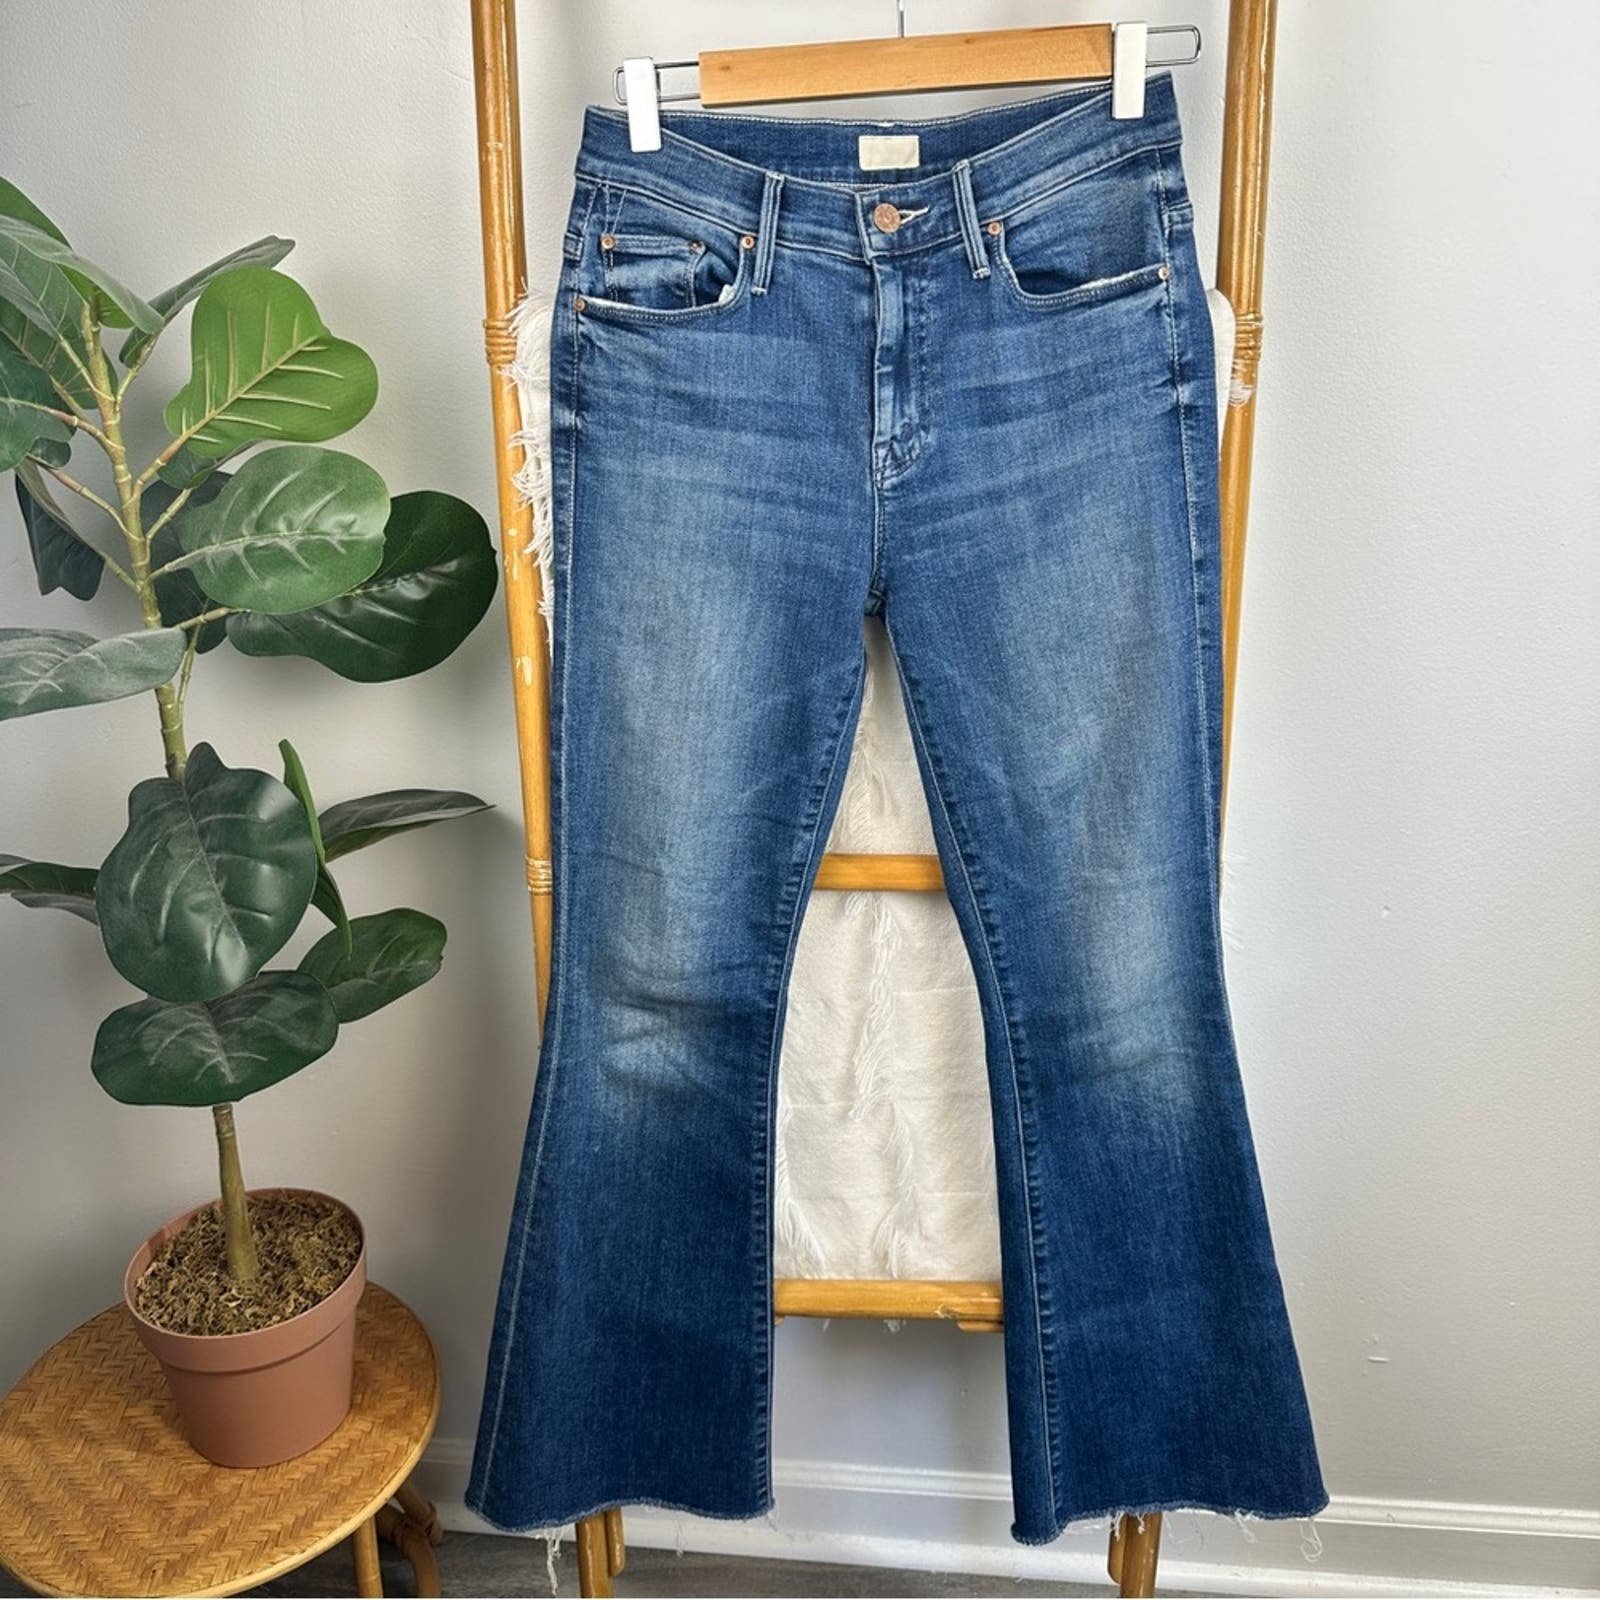 Classic Mother Weekender Fray Jeans in Groovin sz 25 Hx